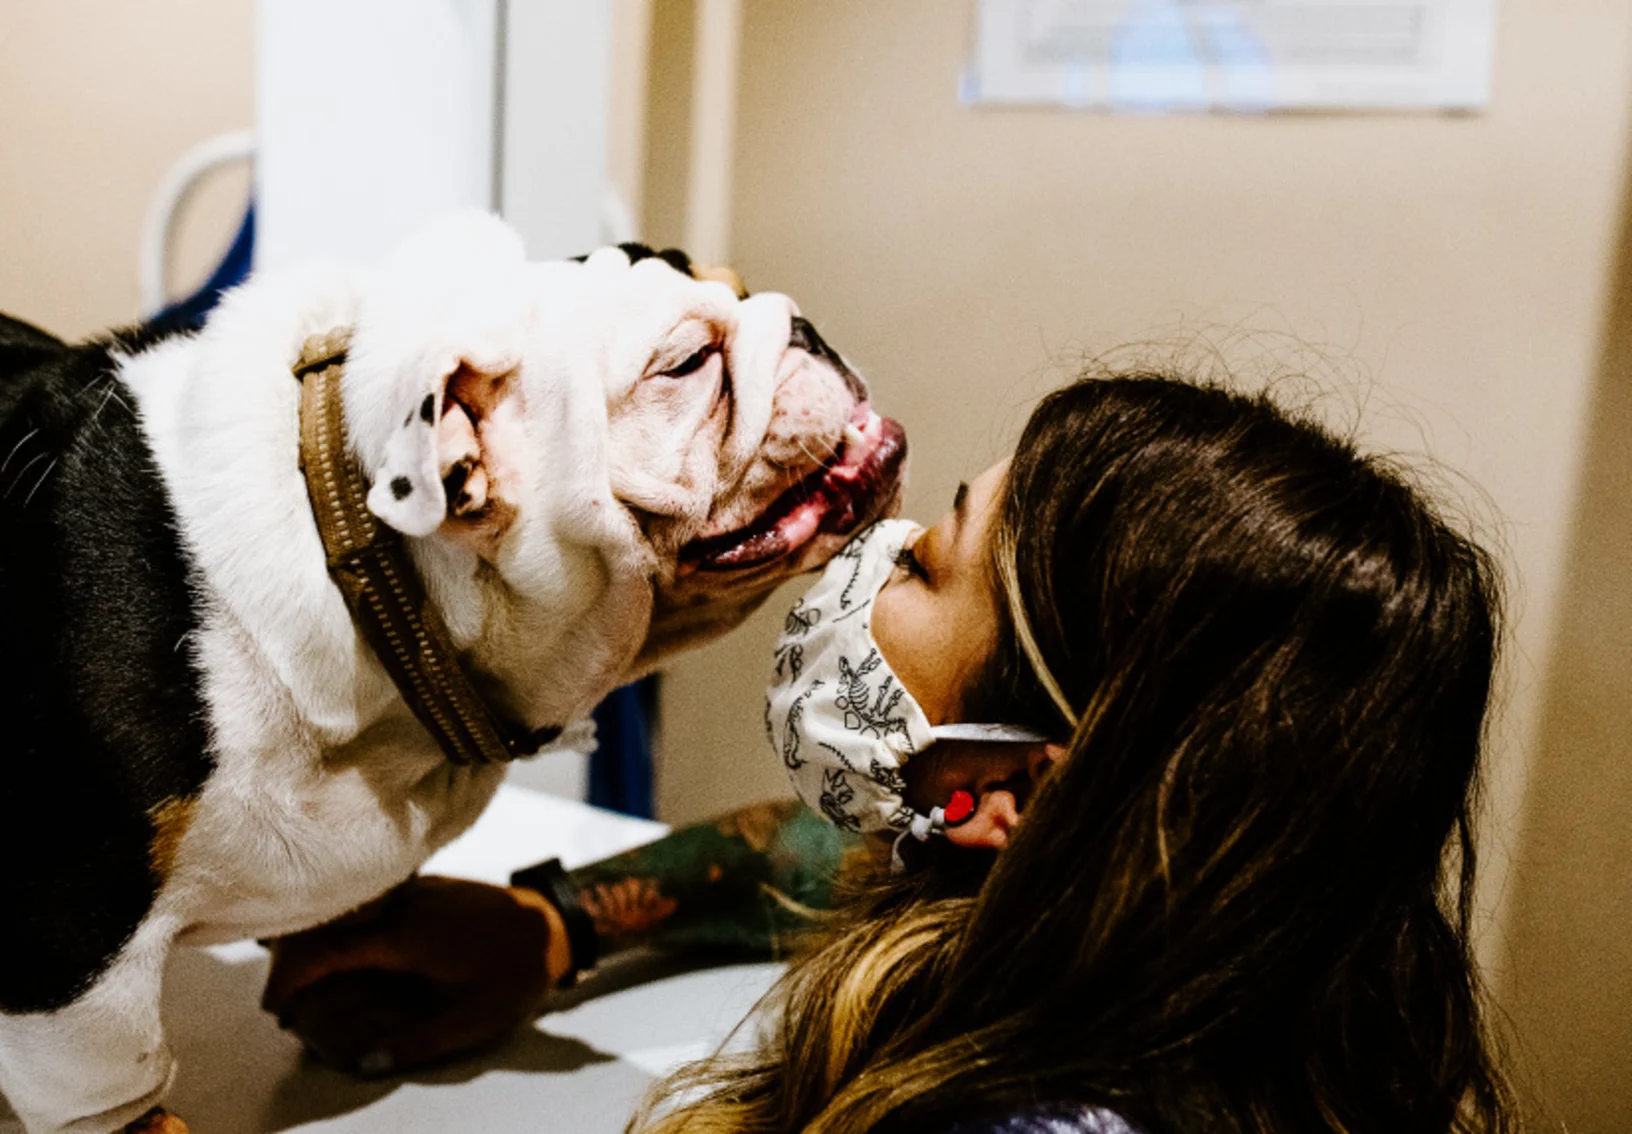 Staff with mask snuggle Bulldog at Overland Veterinary Clinic